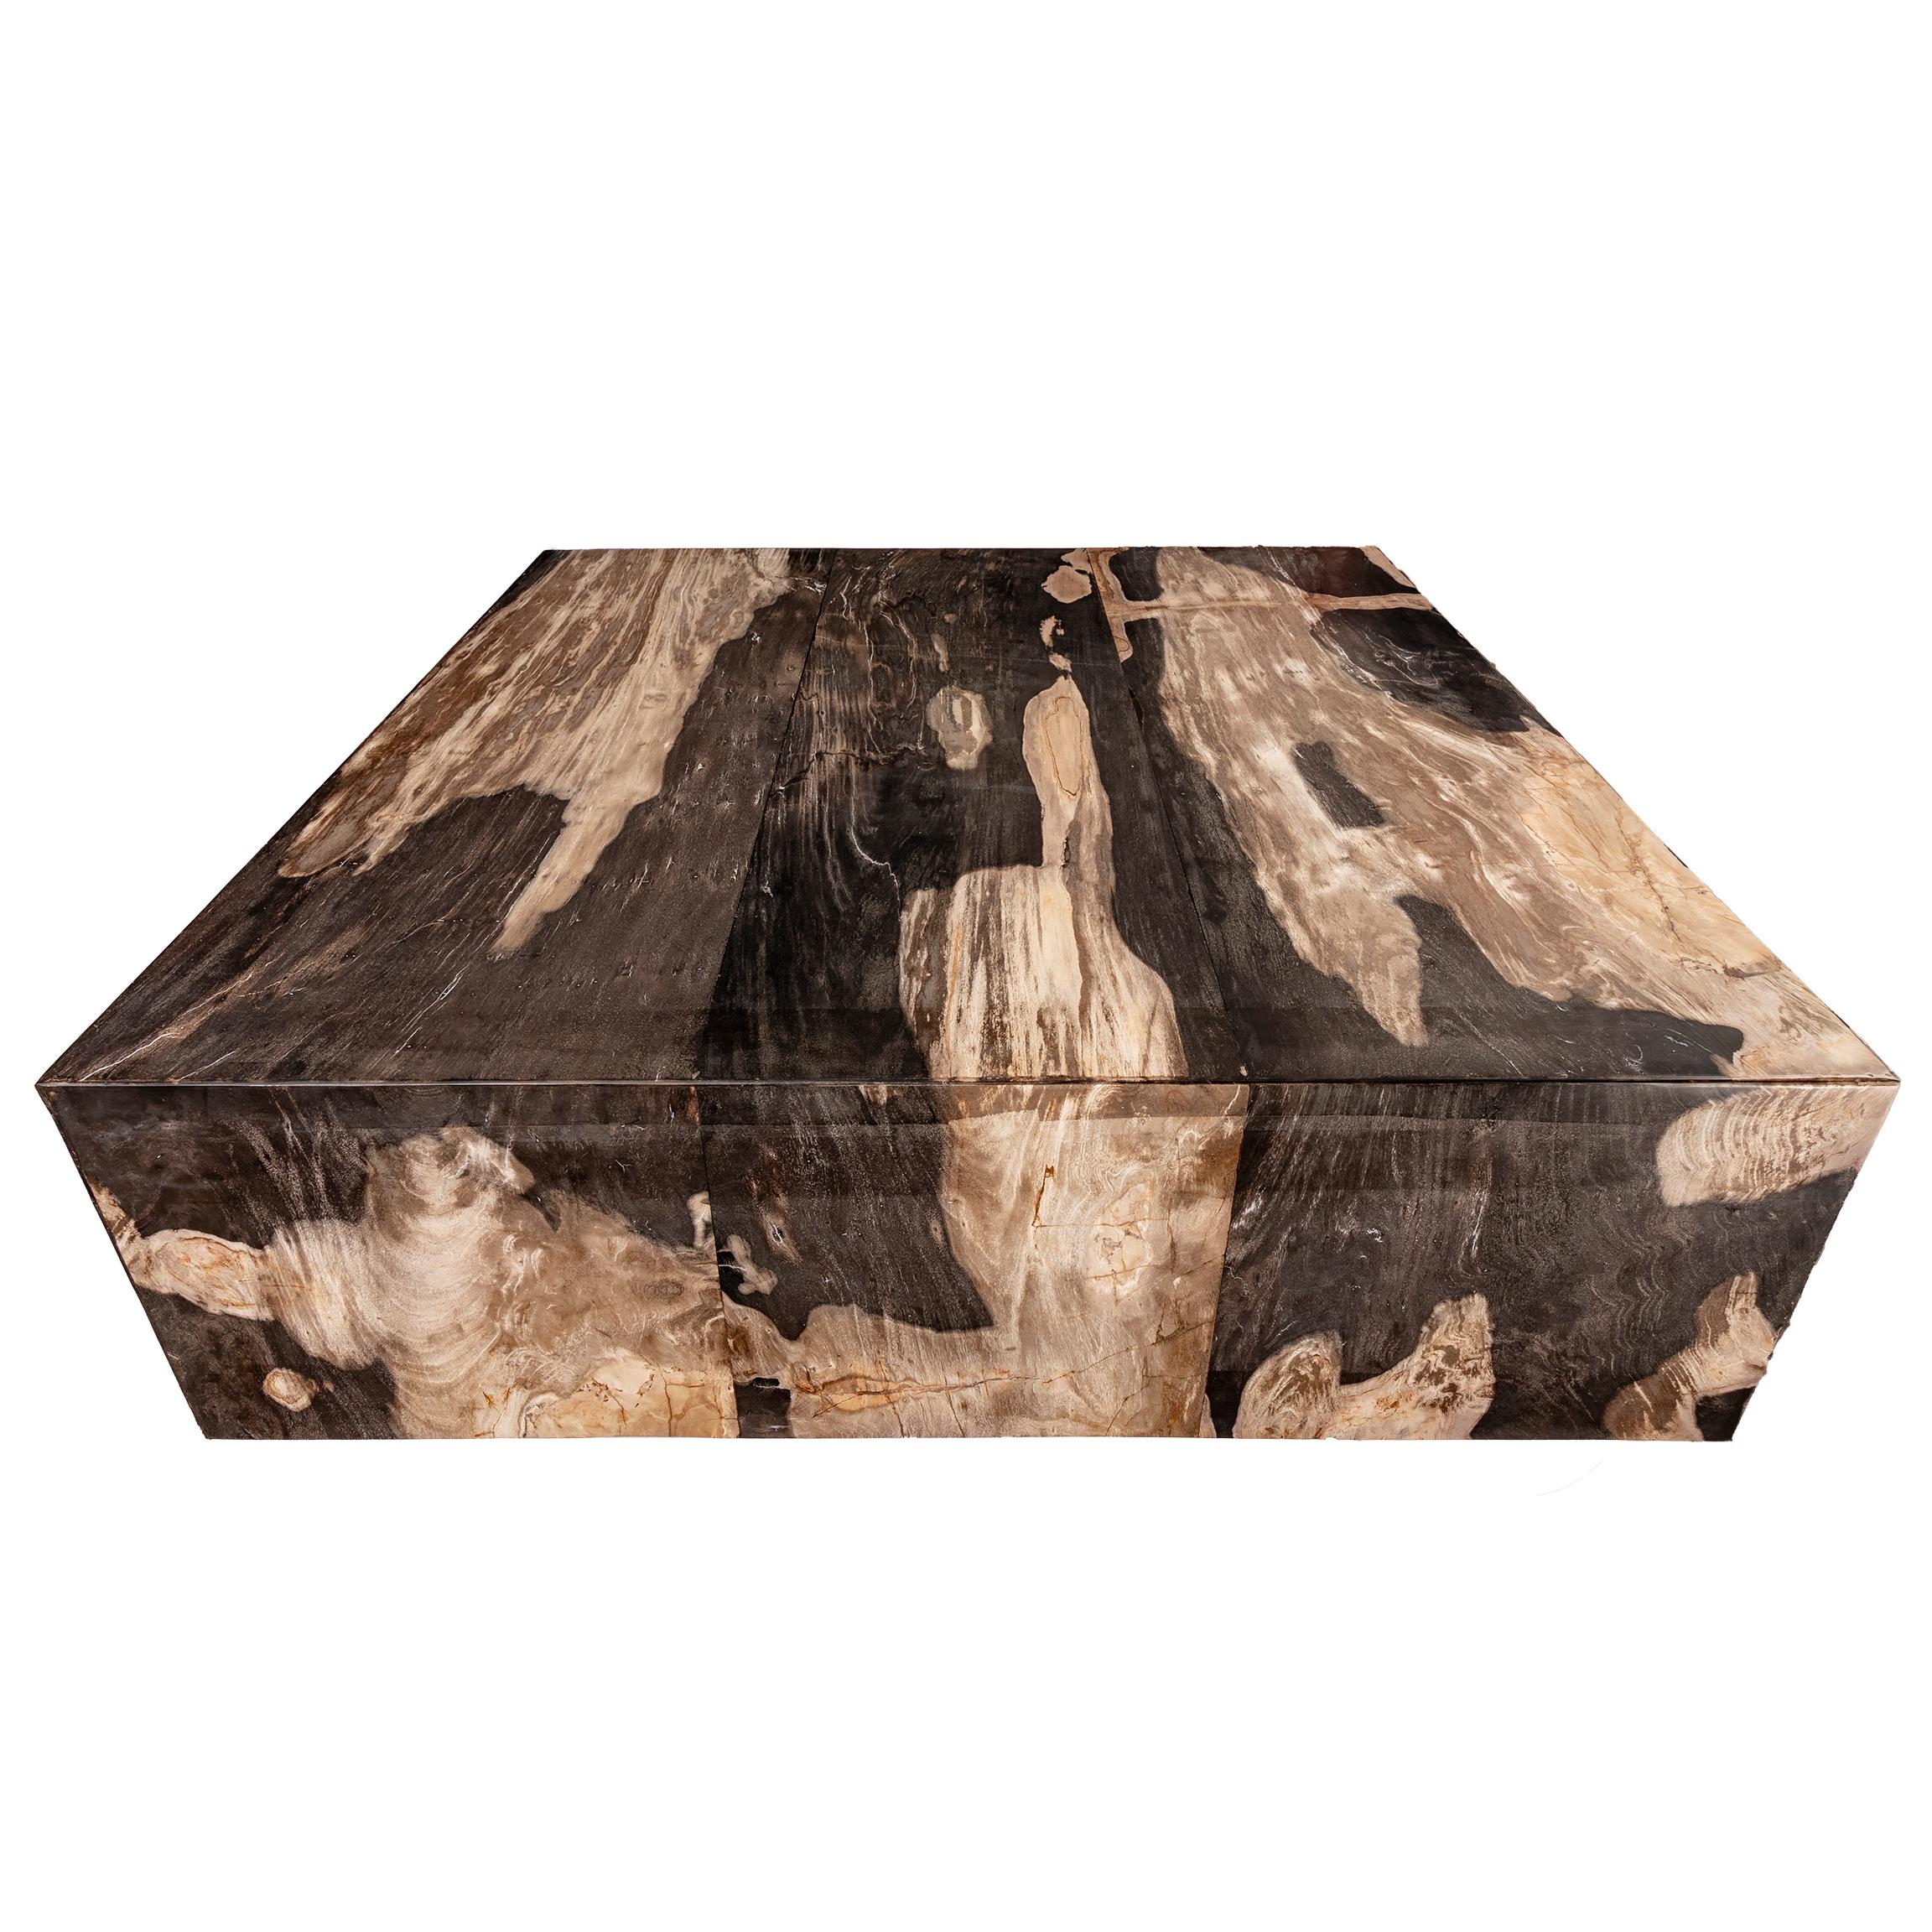 Organic Modern Square Center or Coffee Table, Petrified Wood